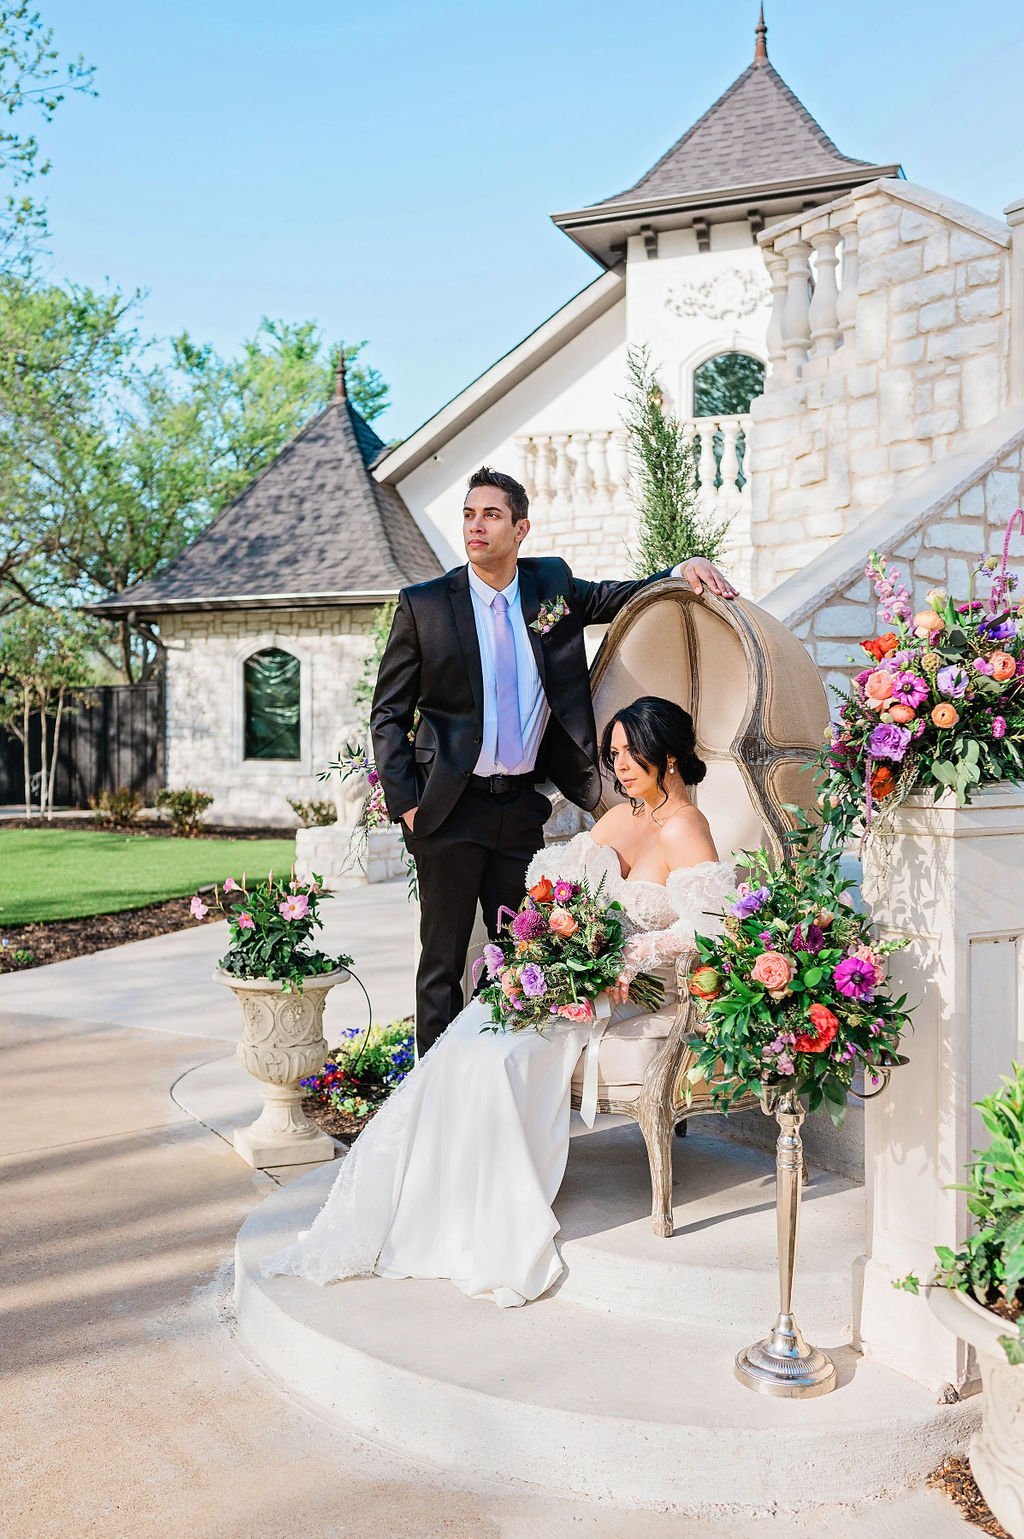 a bride and groom pose out front of castle-like wedding venue in an upholstered chair surrounded by flowers